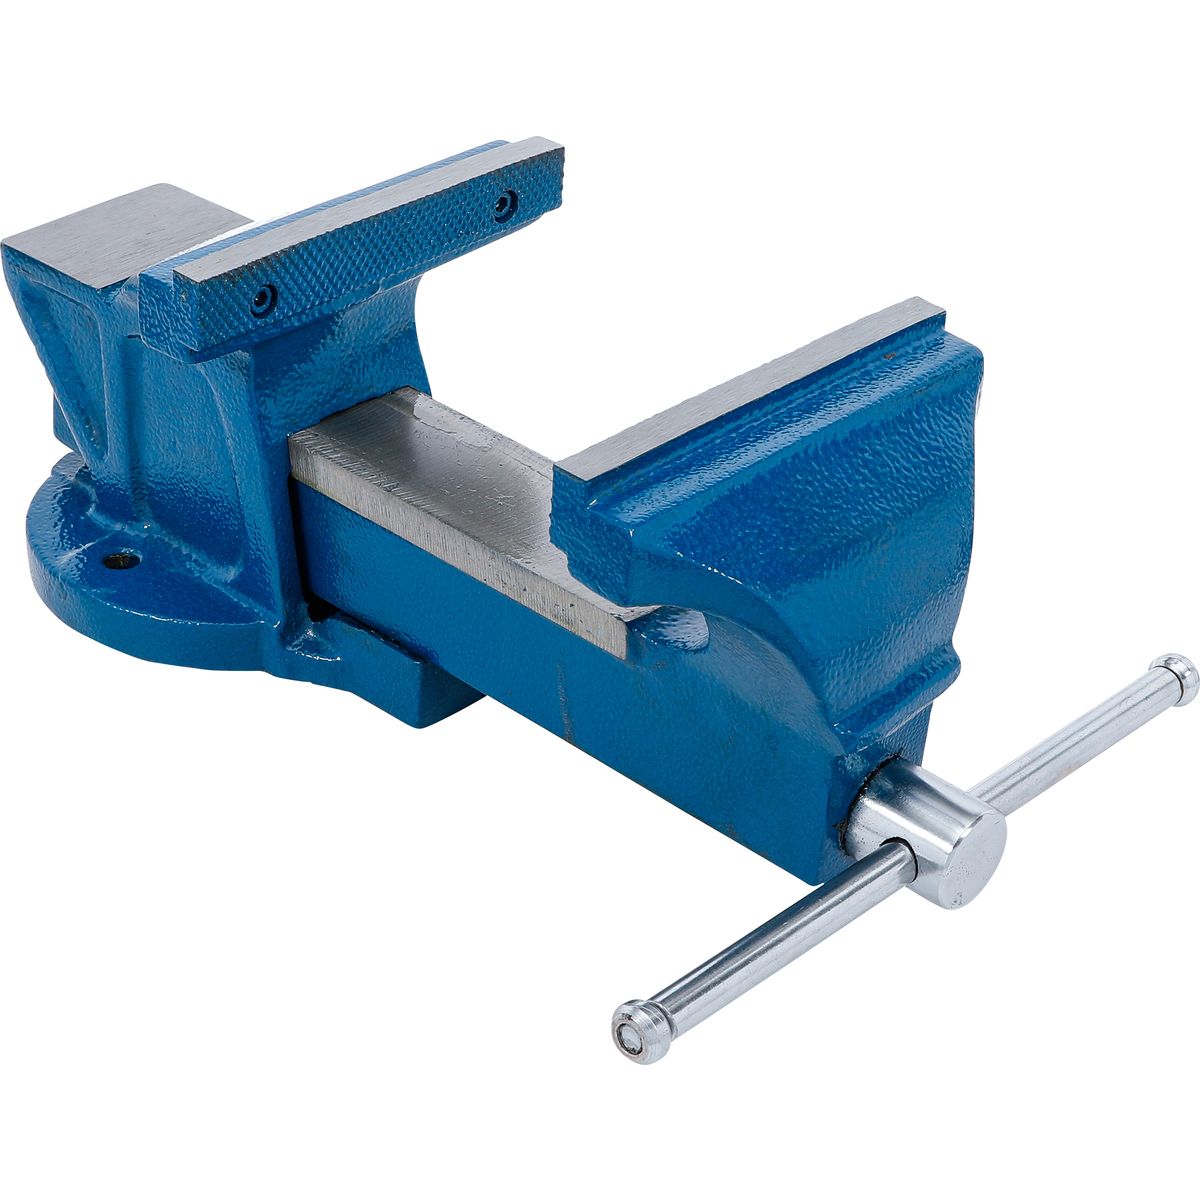 Bench Vice | 150 mm Jaws